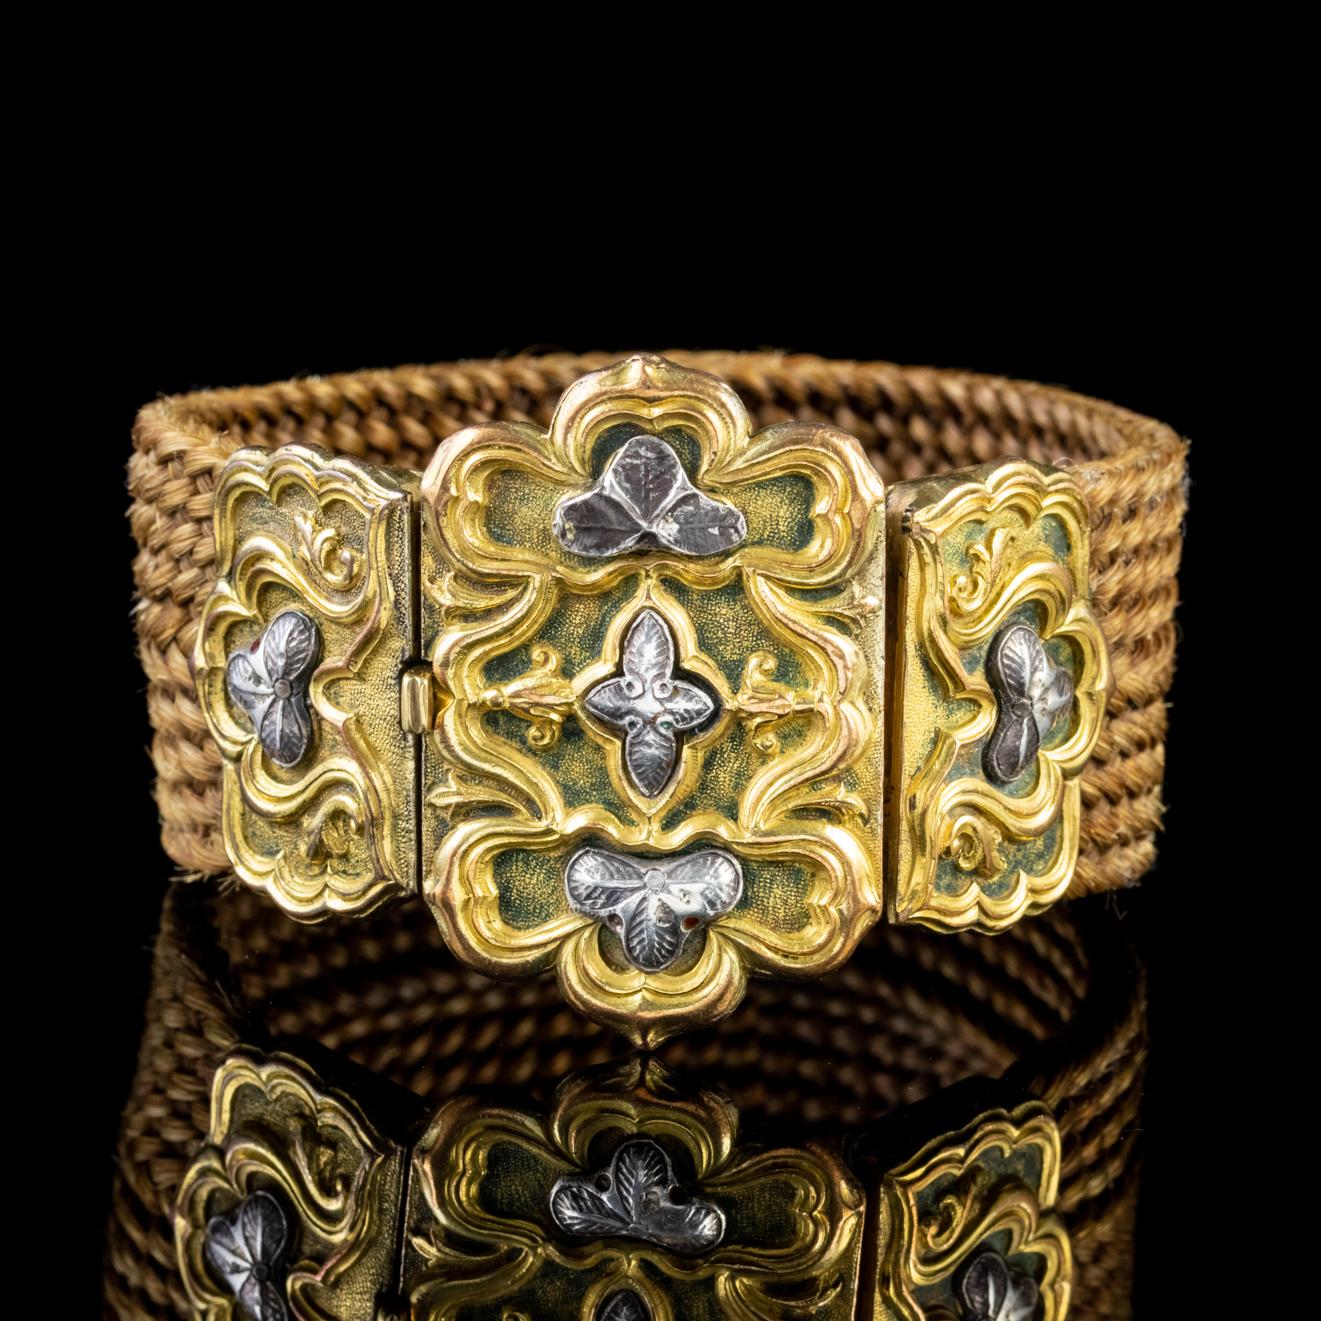 This grand antique Georgian Mourning bracelet features a thick band of braided hair which is tightly woven and a lovely shade of golden brown. 

Mourning jewellery mirrored the lives and times of the people who wore it. It was a souvenir to remember